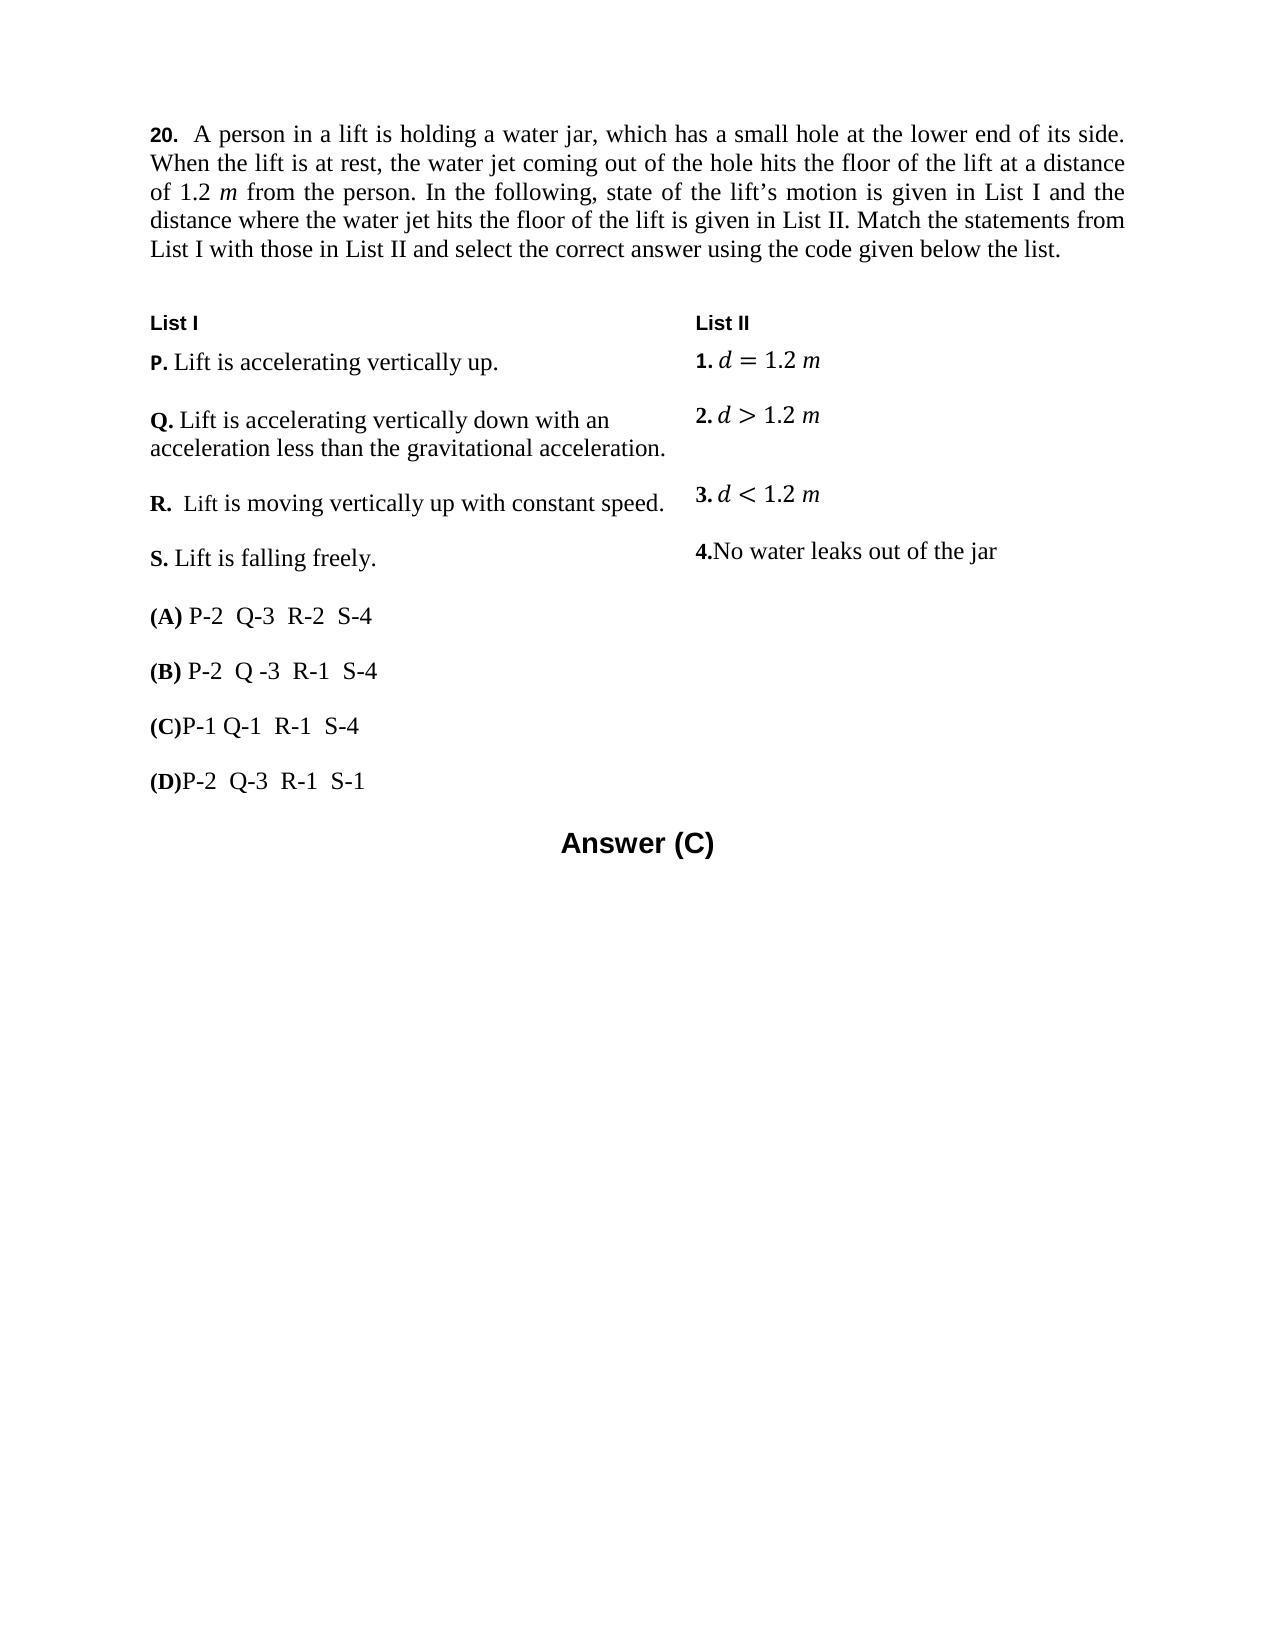 JEE (Advanced) 2014 Paper II Question Paper - Page 12